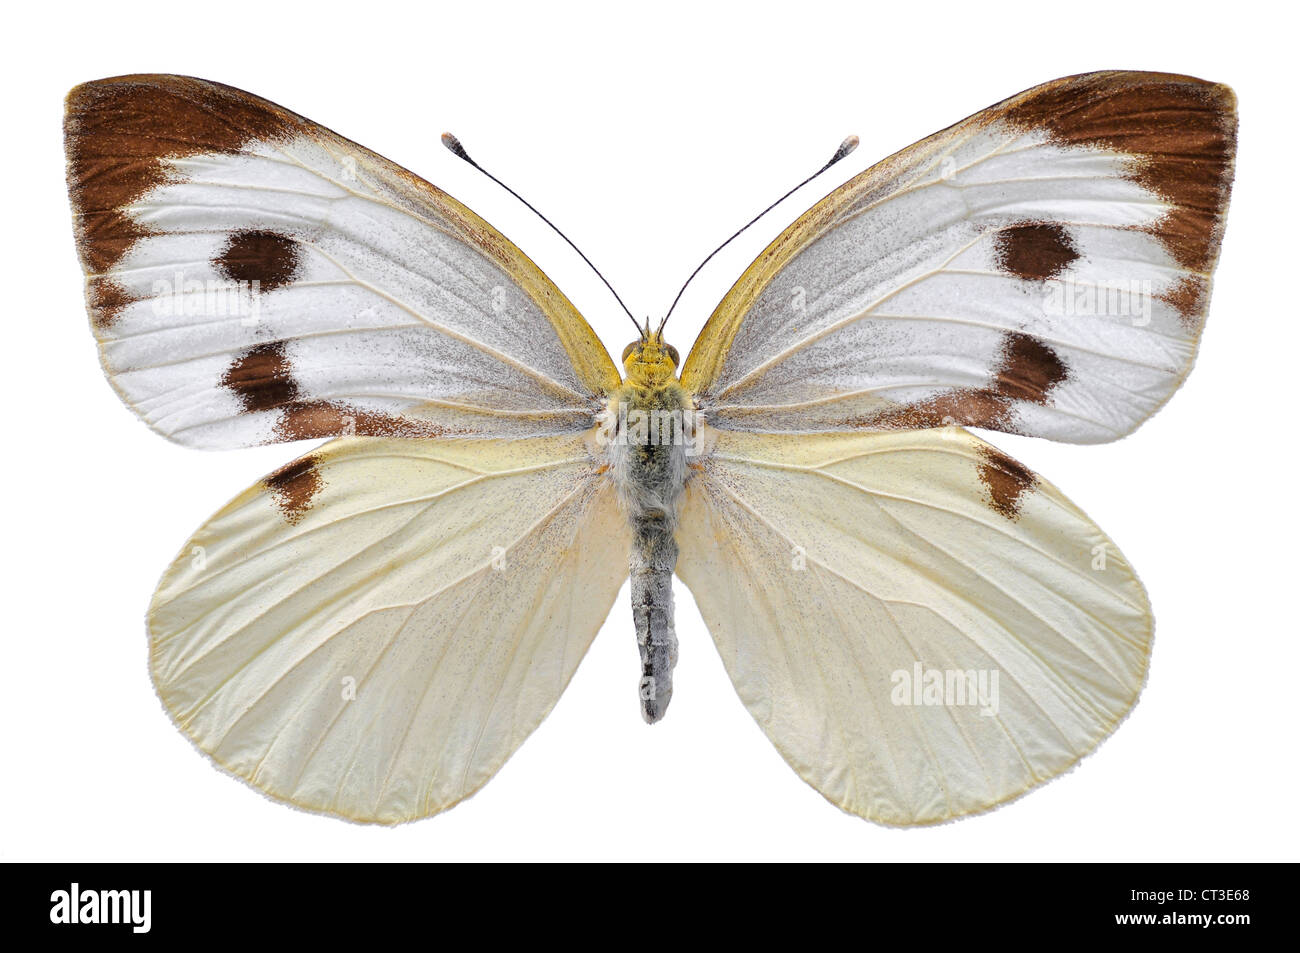 Large white butterfly, also called Cabbage Butterfly or Cabbage White (Pieris brassicae), isolated on white background Stock Photo